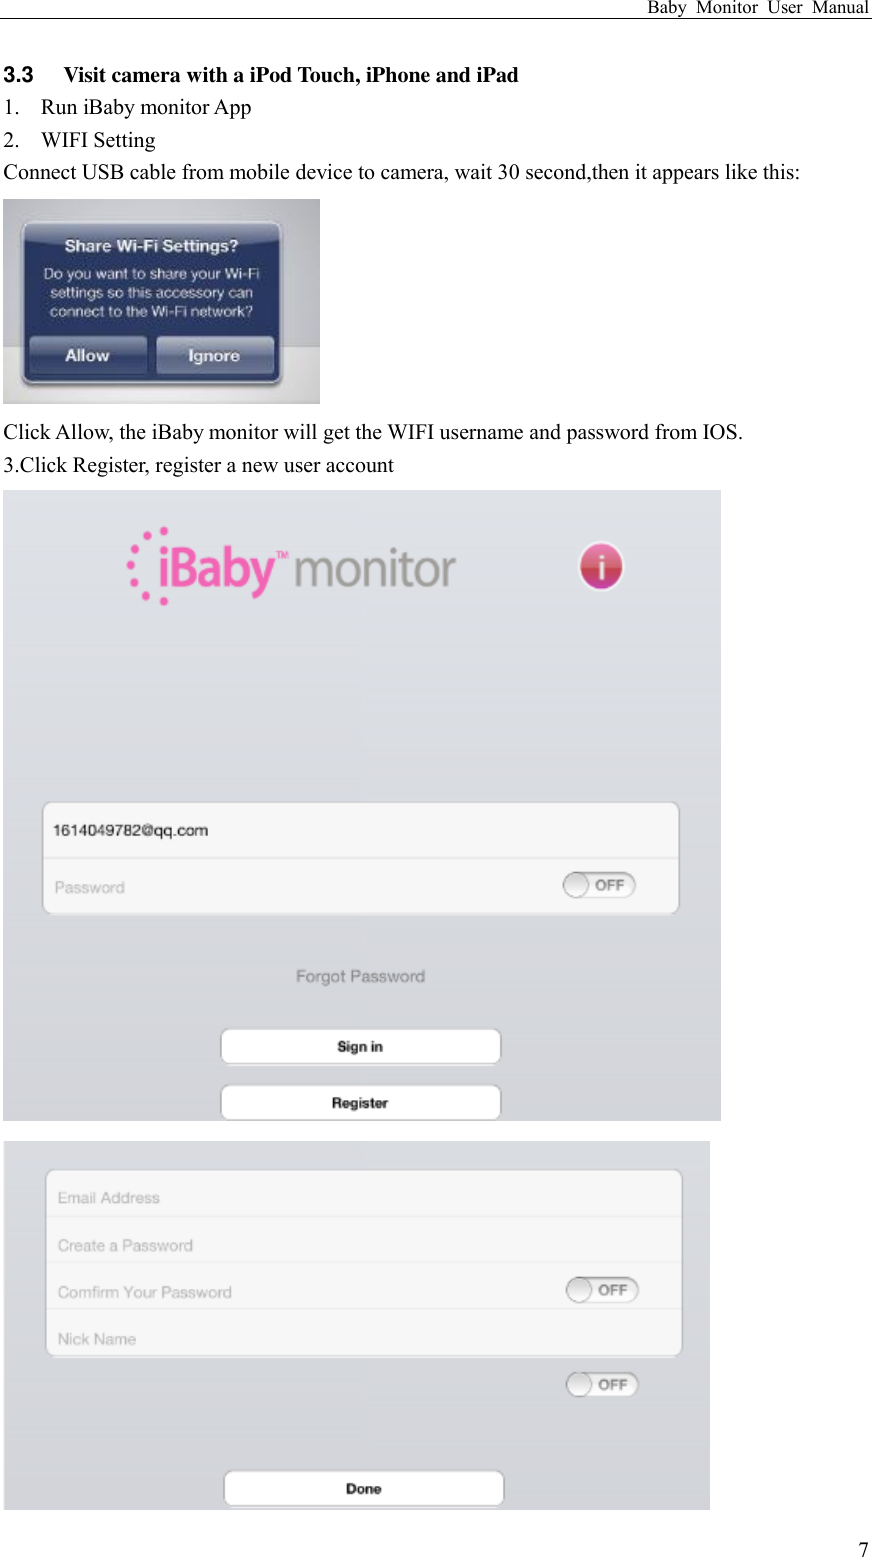 Baby  Monitor  User  Manual  7 3.3  Visit camera with a iPod Touch, iPhone and iPad 1. Run iBaby monitor App 2. WIFI Setting Connect USB cable from mobile device to camera, wait 30 second,then it appears like this:  Click Allow, the iBaby monitor will get the WIFI username and password from IOS. 3.Click Register, register a new user account   